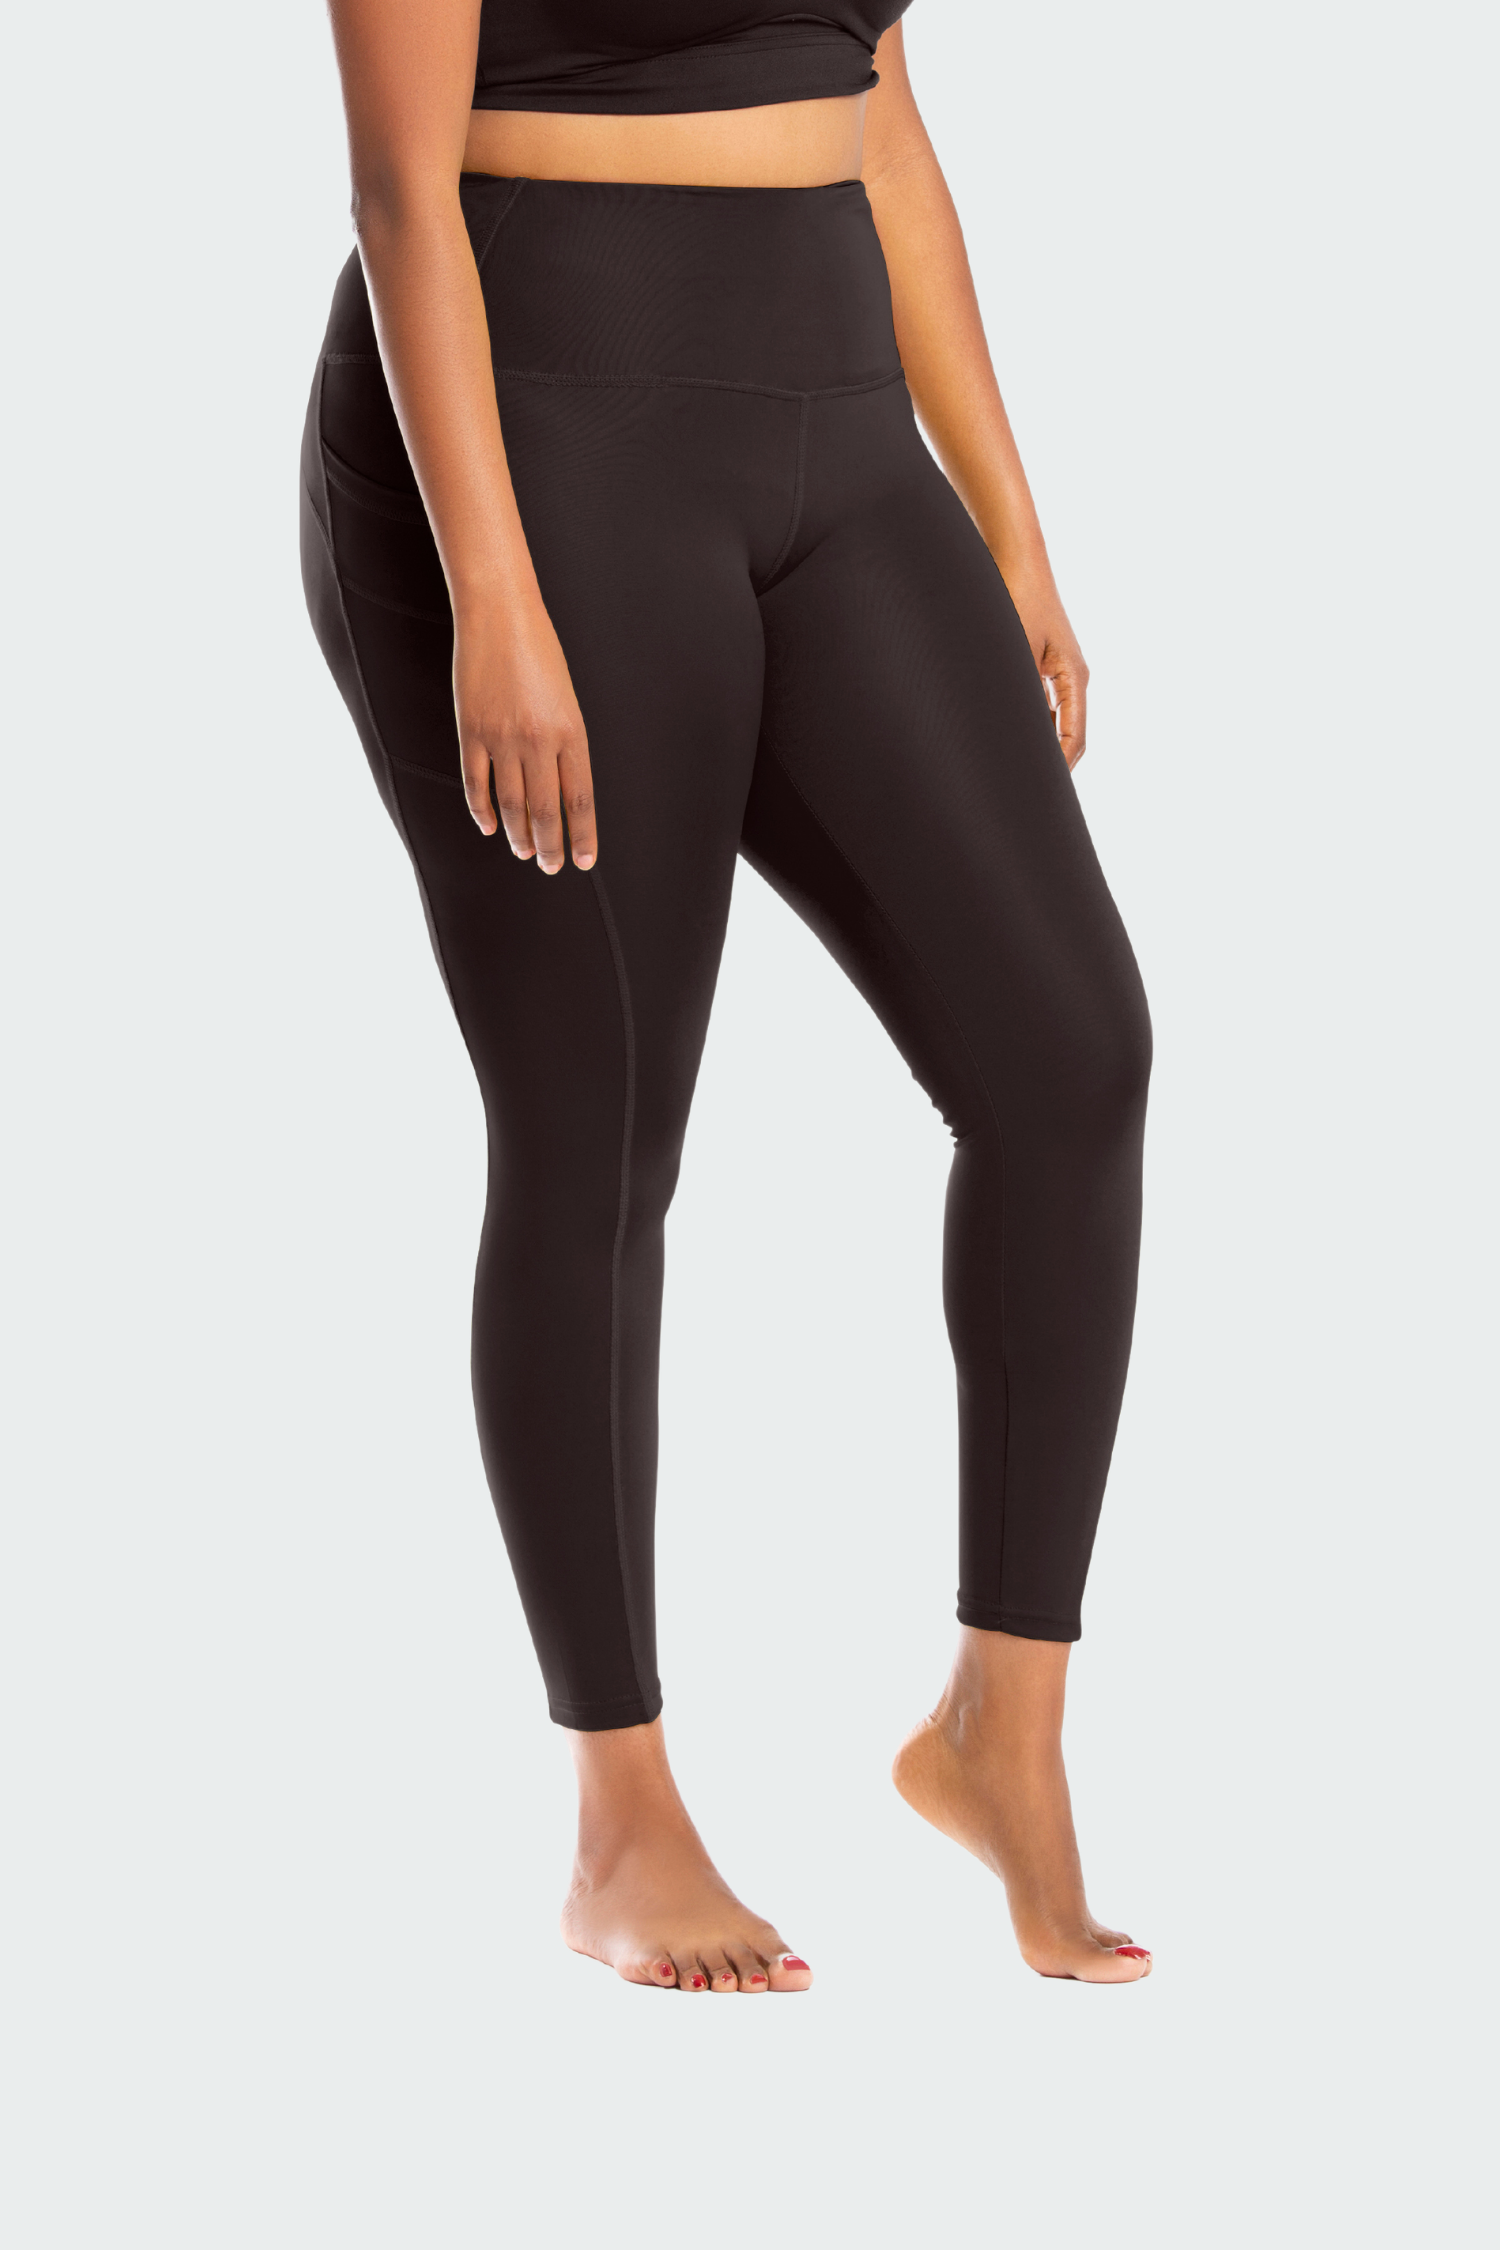 NEW Women's Seamless High-Rise Leggings - All in Motion Size L